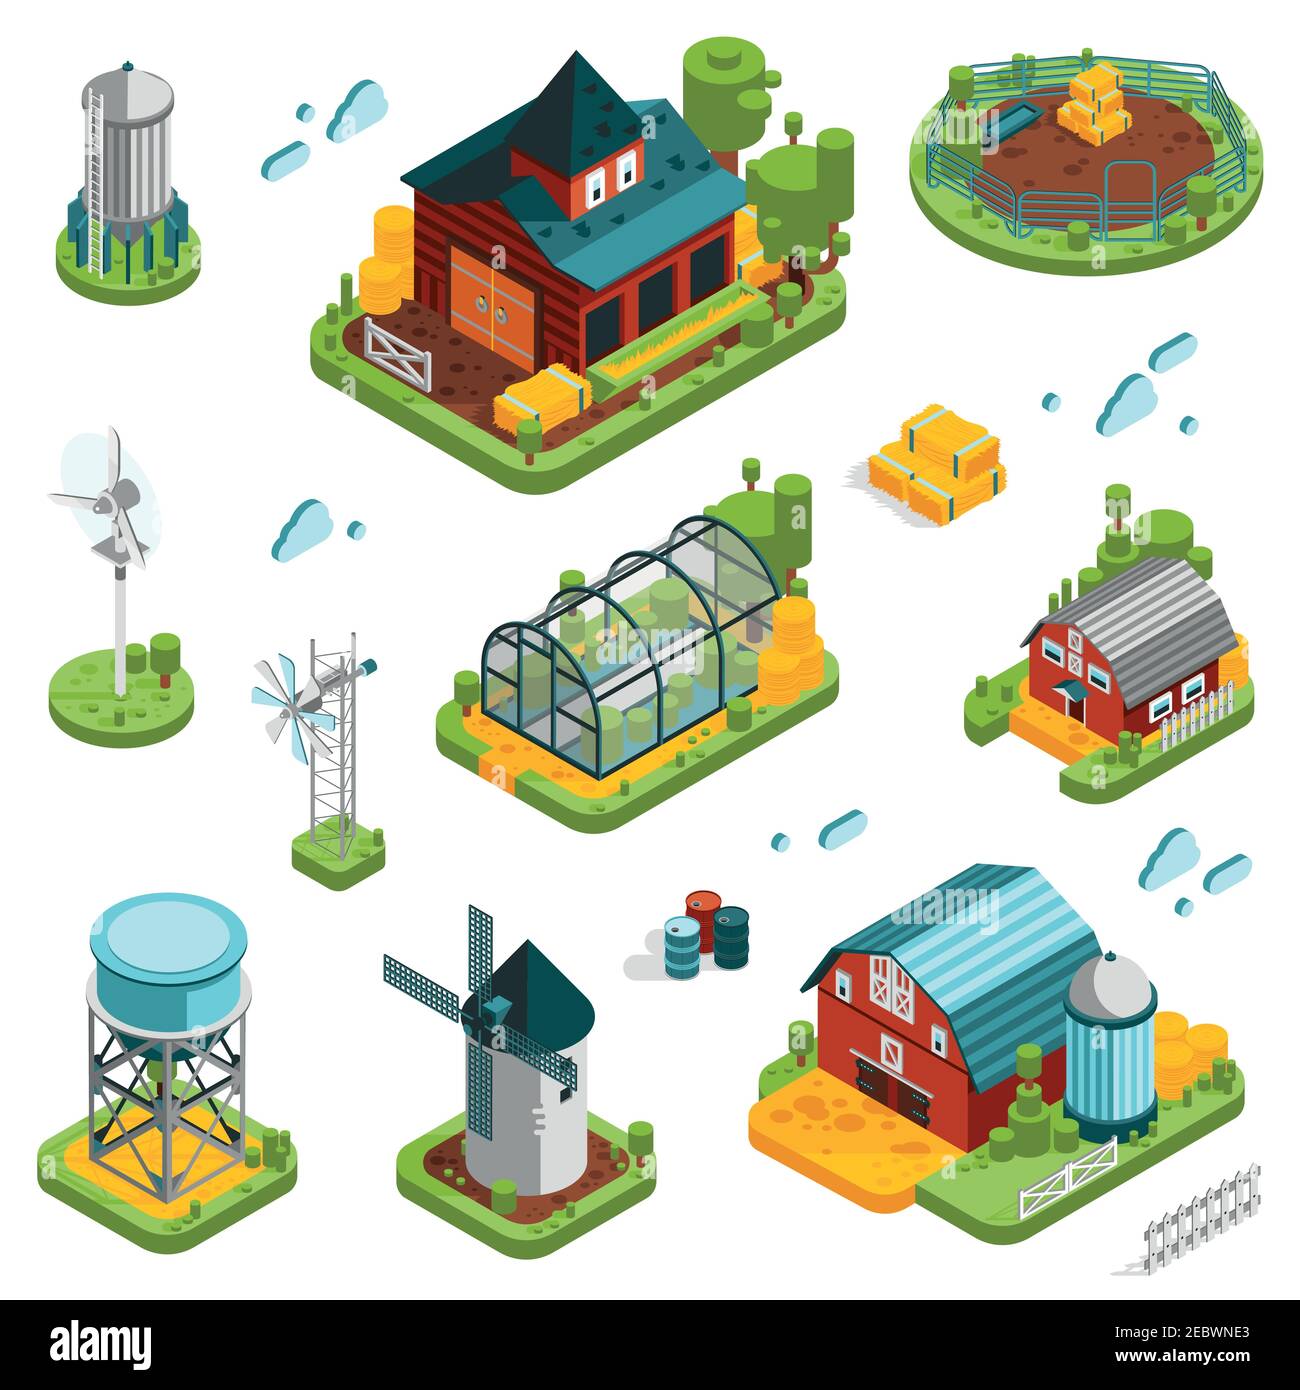 Farm rural buildings isometric elements set with built structures and single isolated storage and cloud icons vector illustration Stock Vector